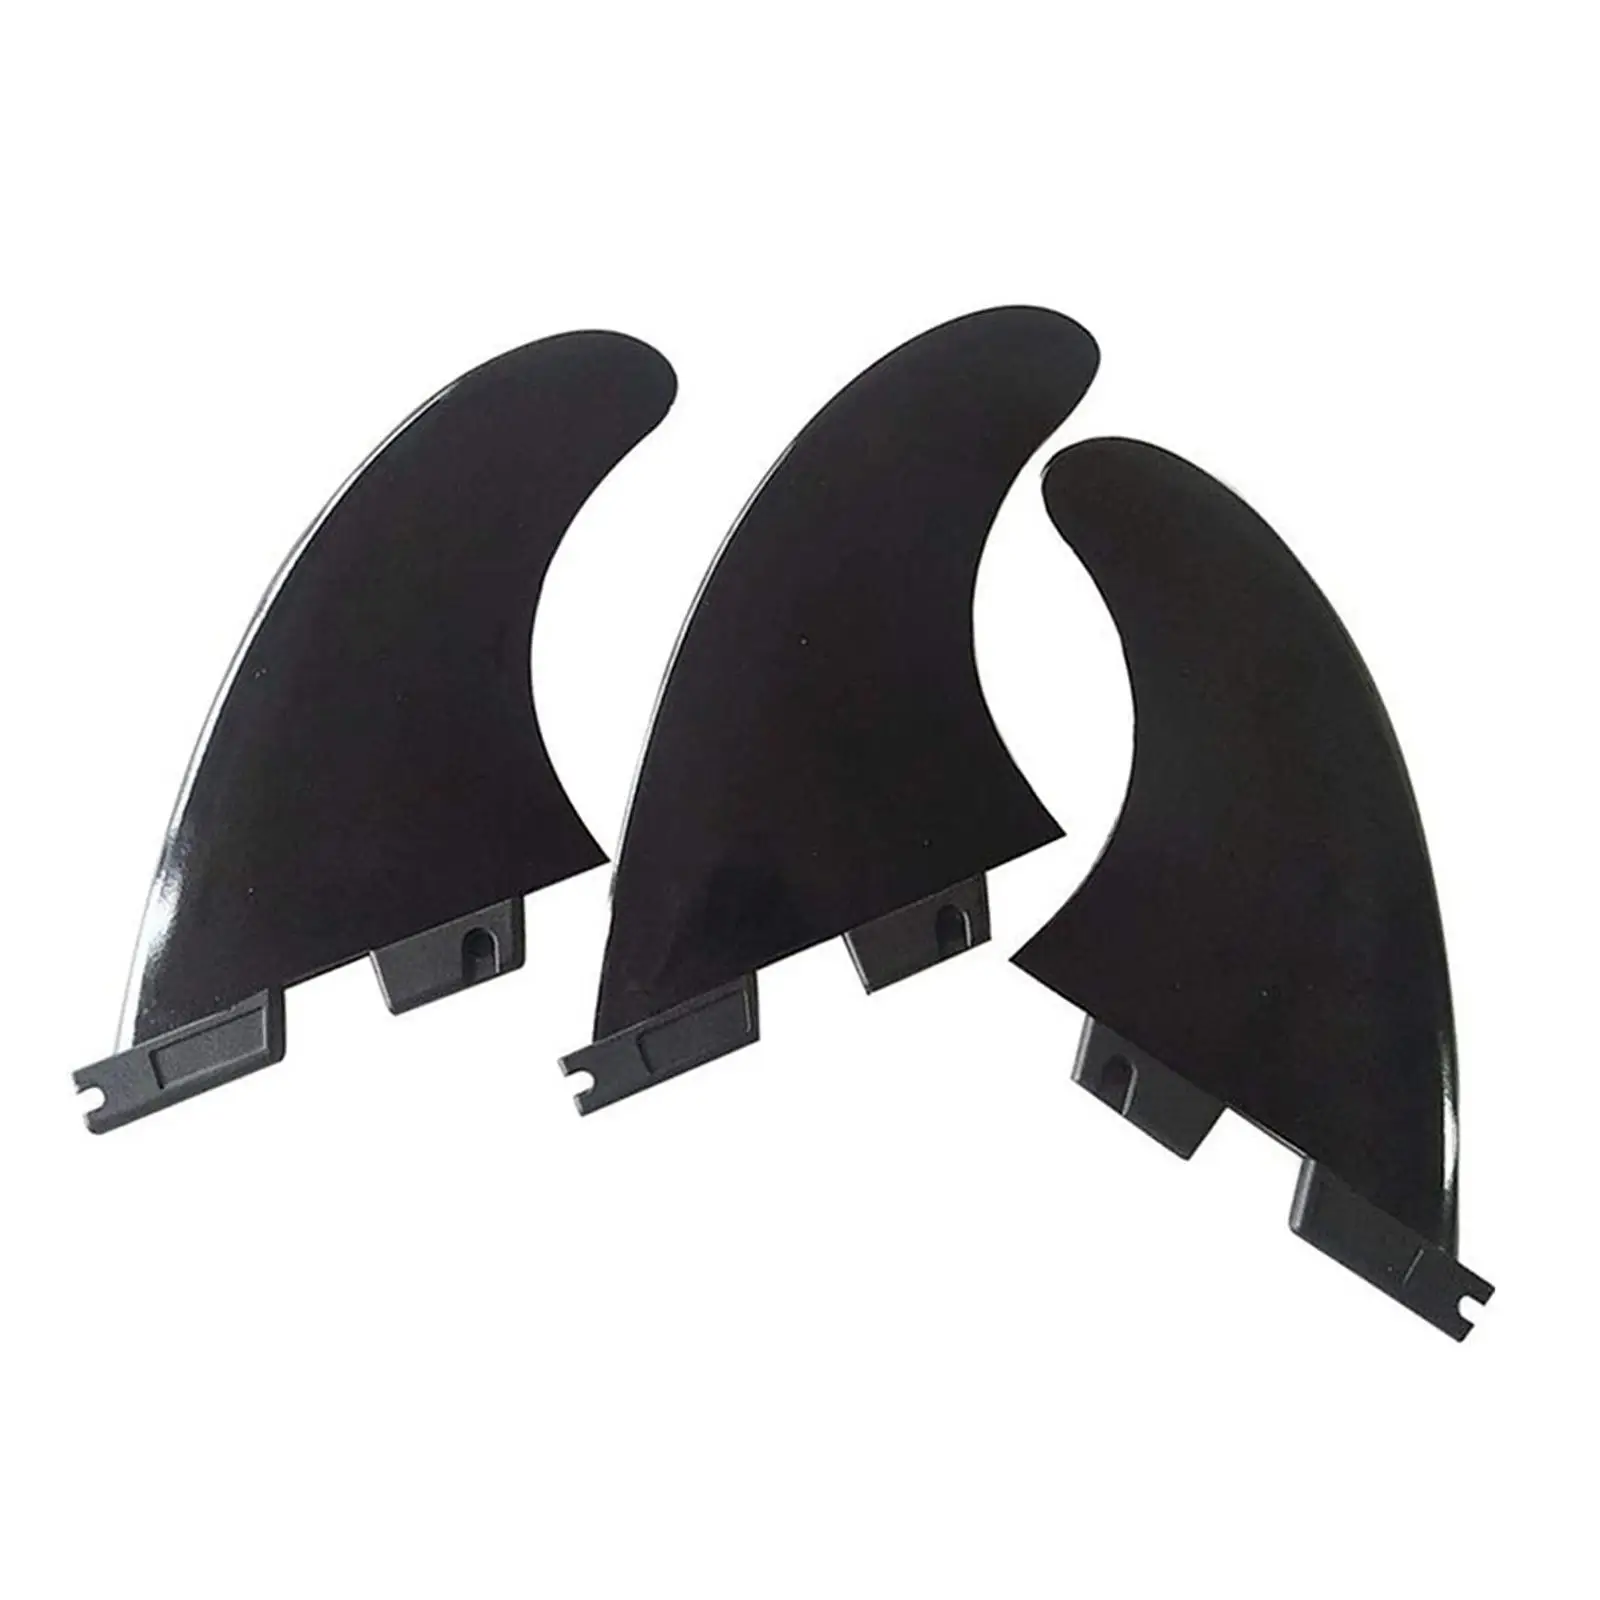 3Pcs Surfboard Fin Replacement Surf Fin Quick Release Surfing Fin for Longboard Boat Stand up Paddleboard Surfing Boards Repair